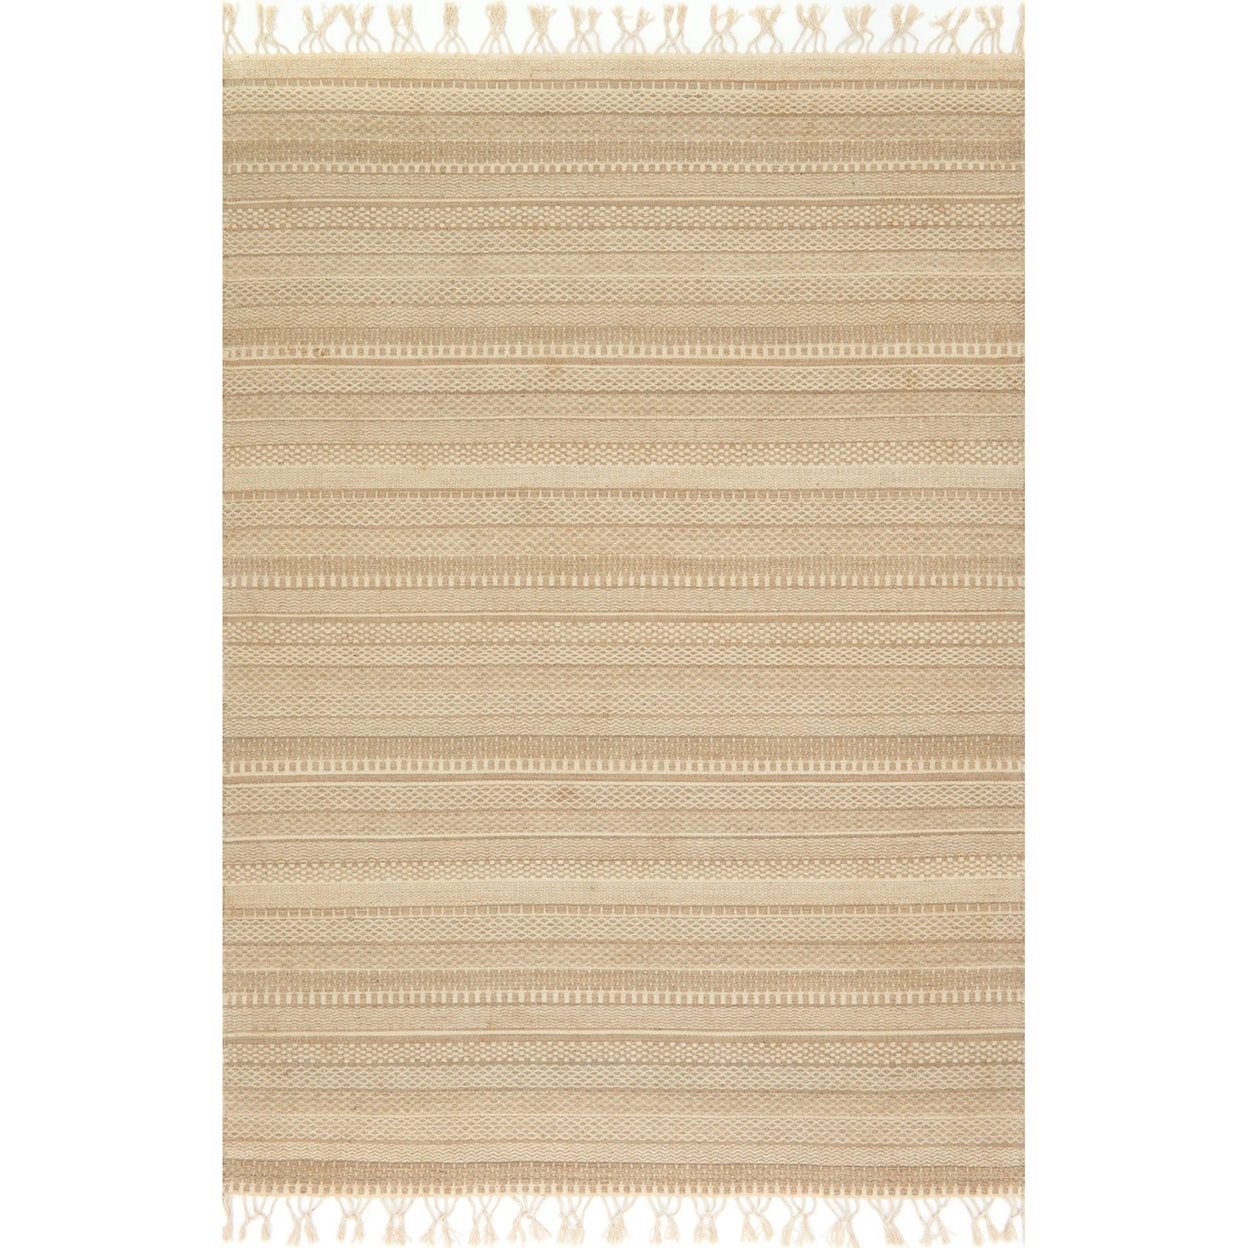 Magnolia Home by Joanna Gaines for Loloi Mikey 5' 0" x 7' 6" Rectangle Rug